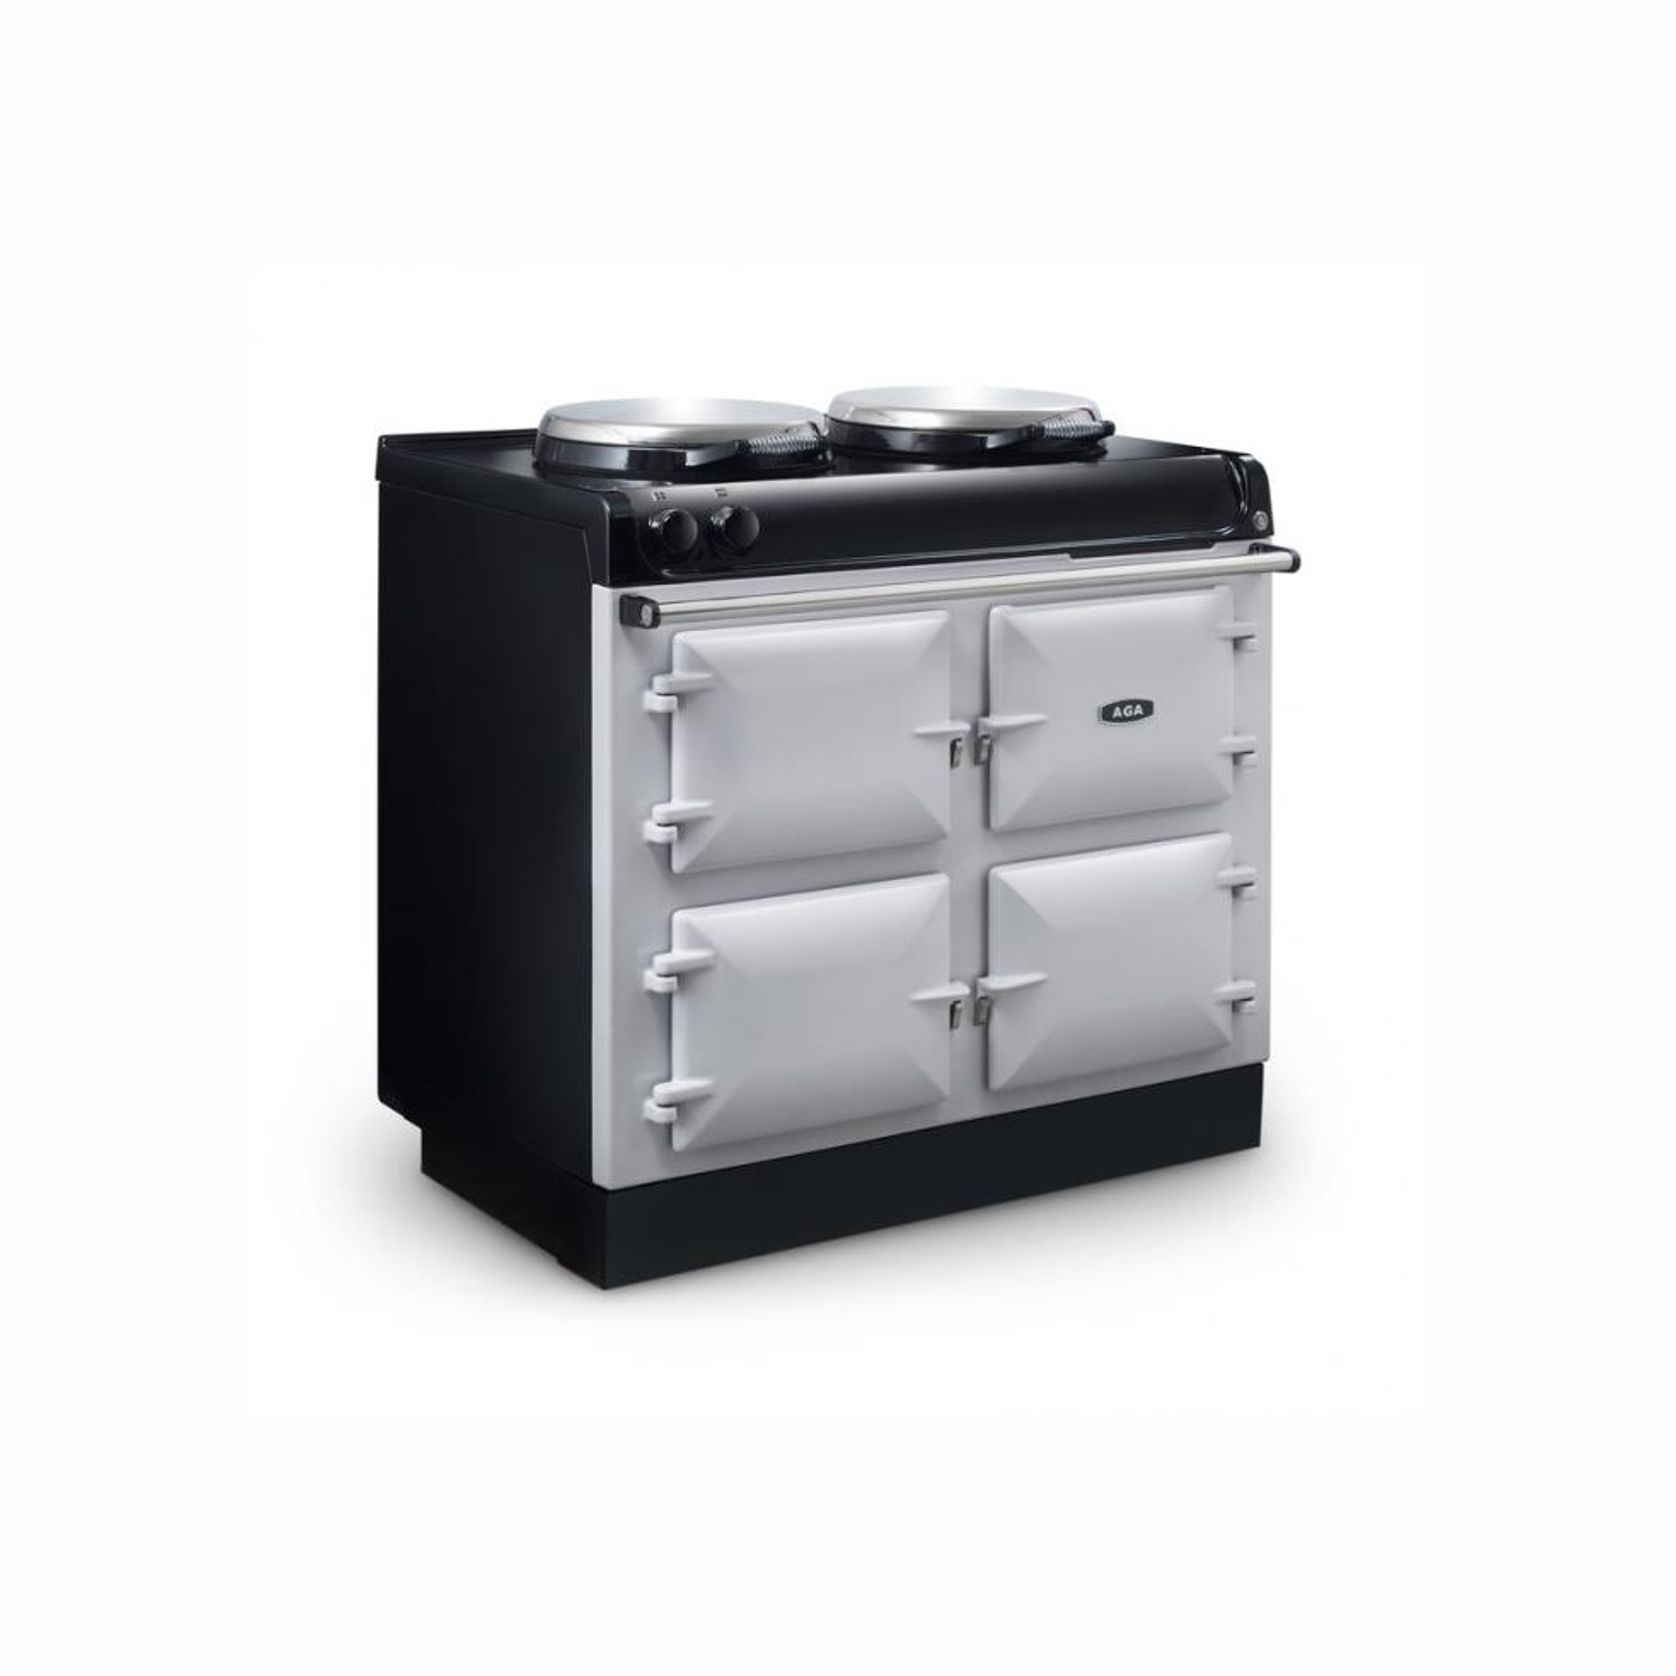 AGA R3 Series 100 Twin Hotplates Cooker gallery detail image